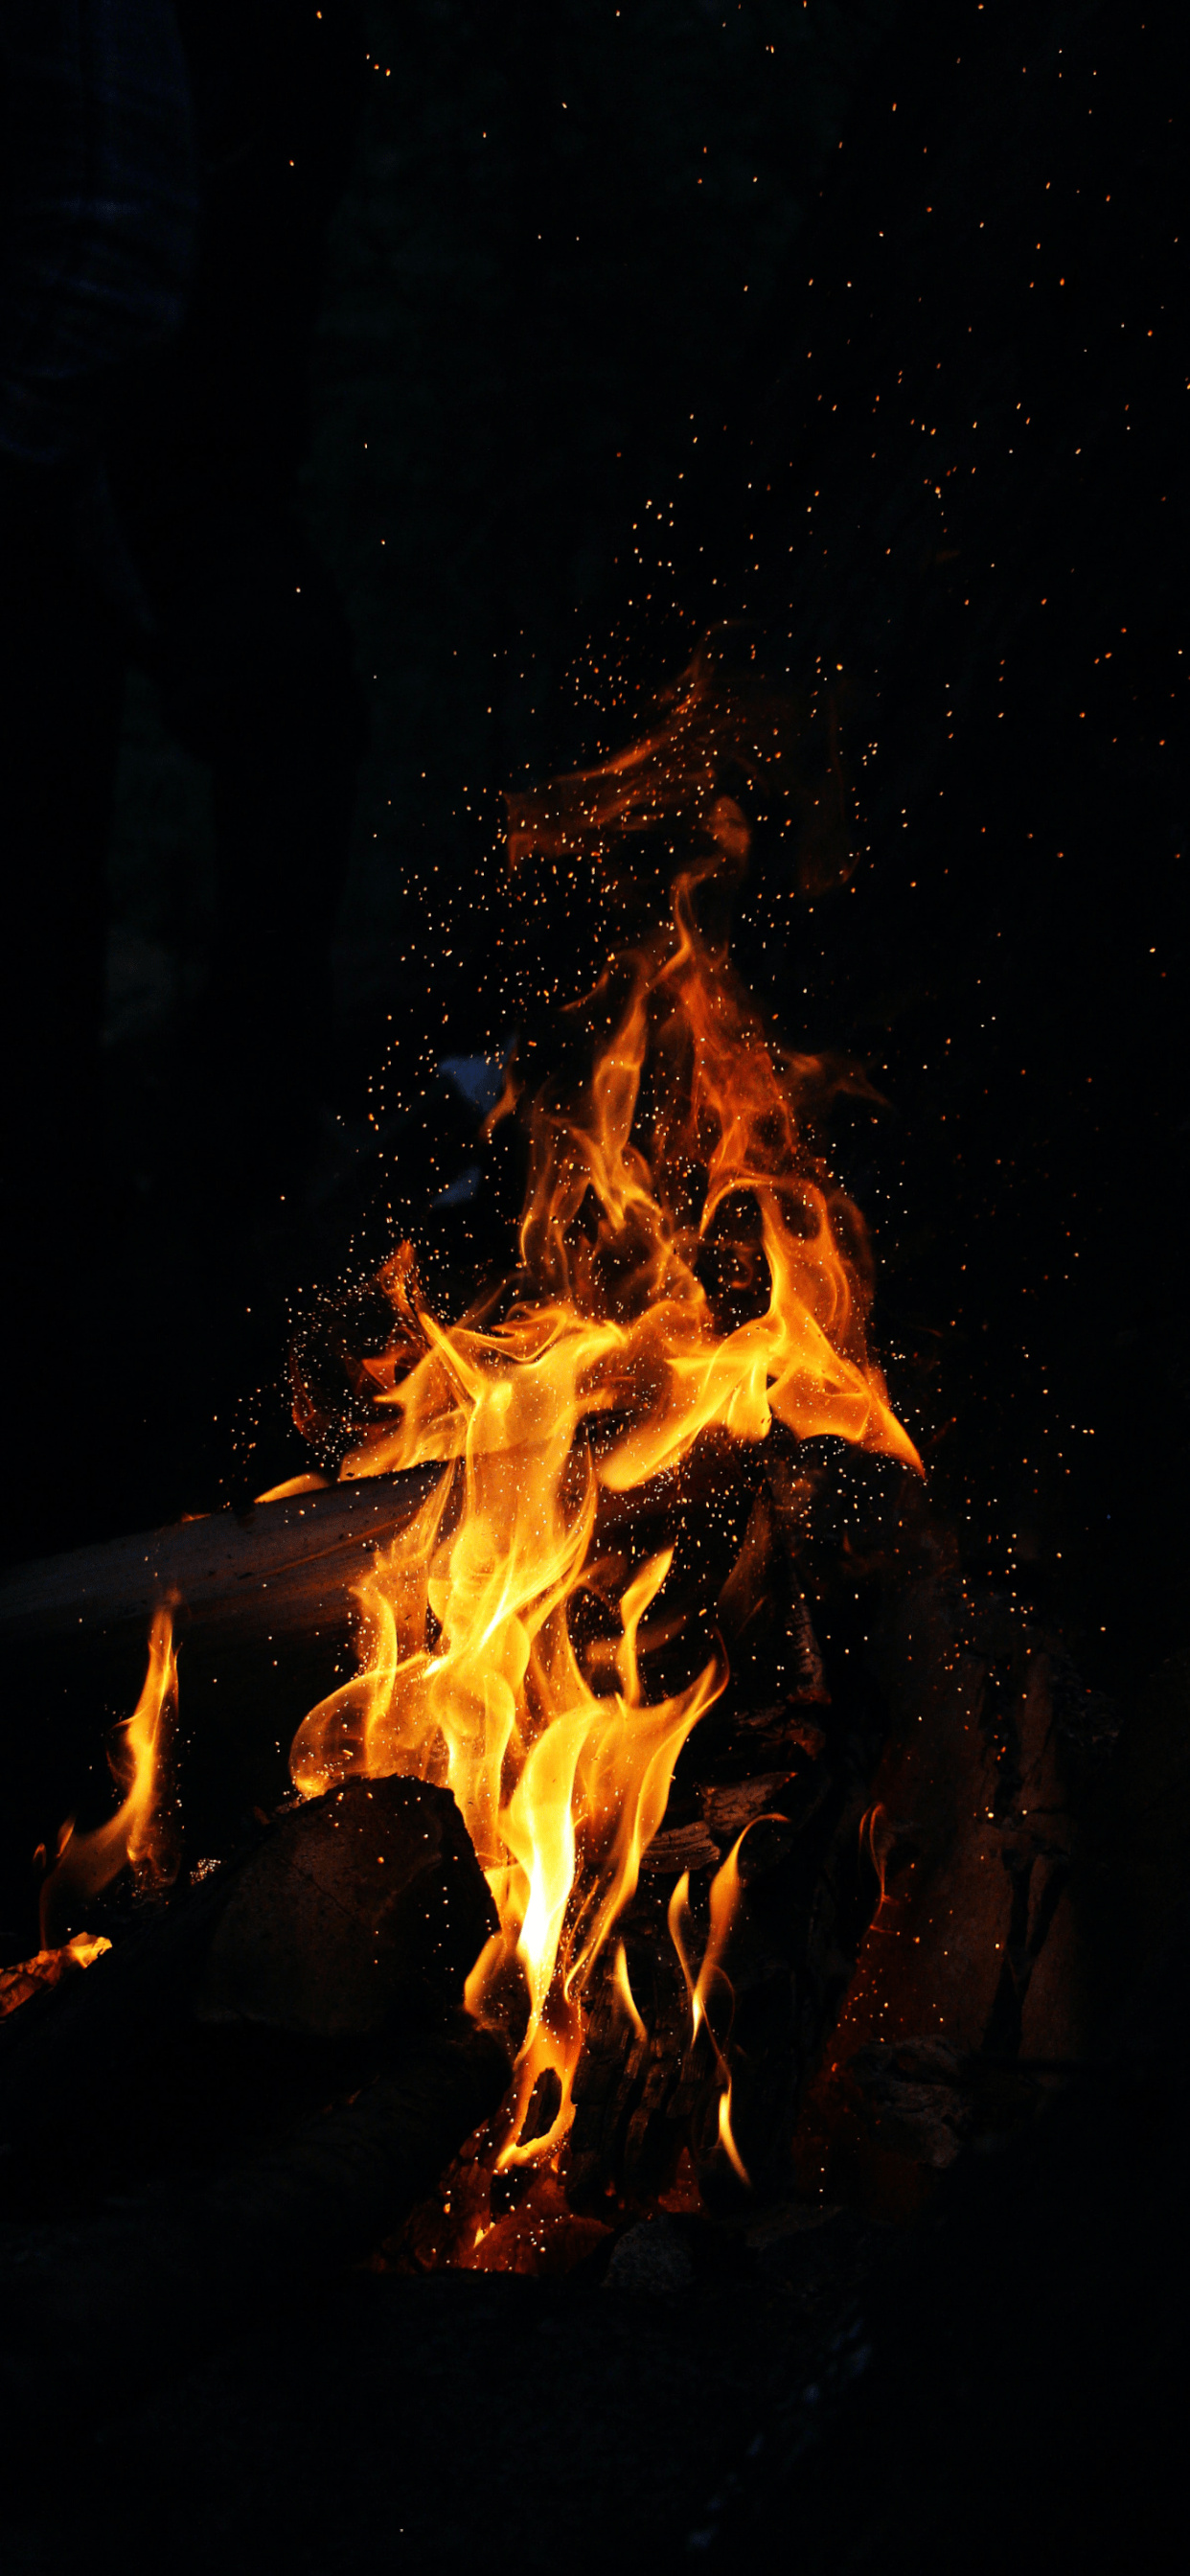 Fireplace: A bonfire, A large and controlled outdoor fire. 1250x2690 HD Wallpaper.